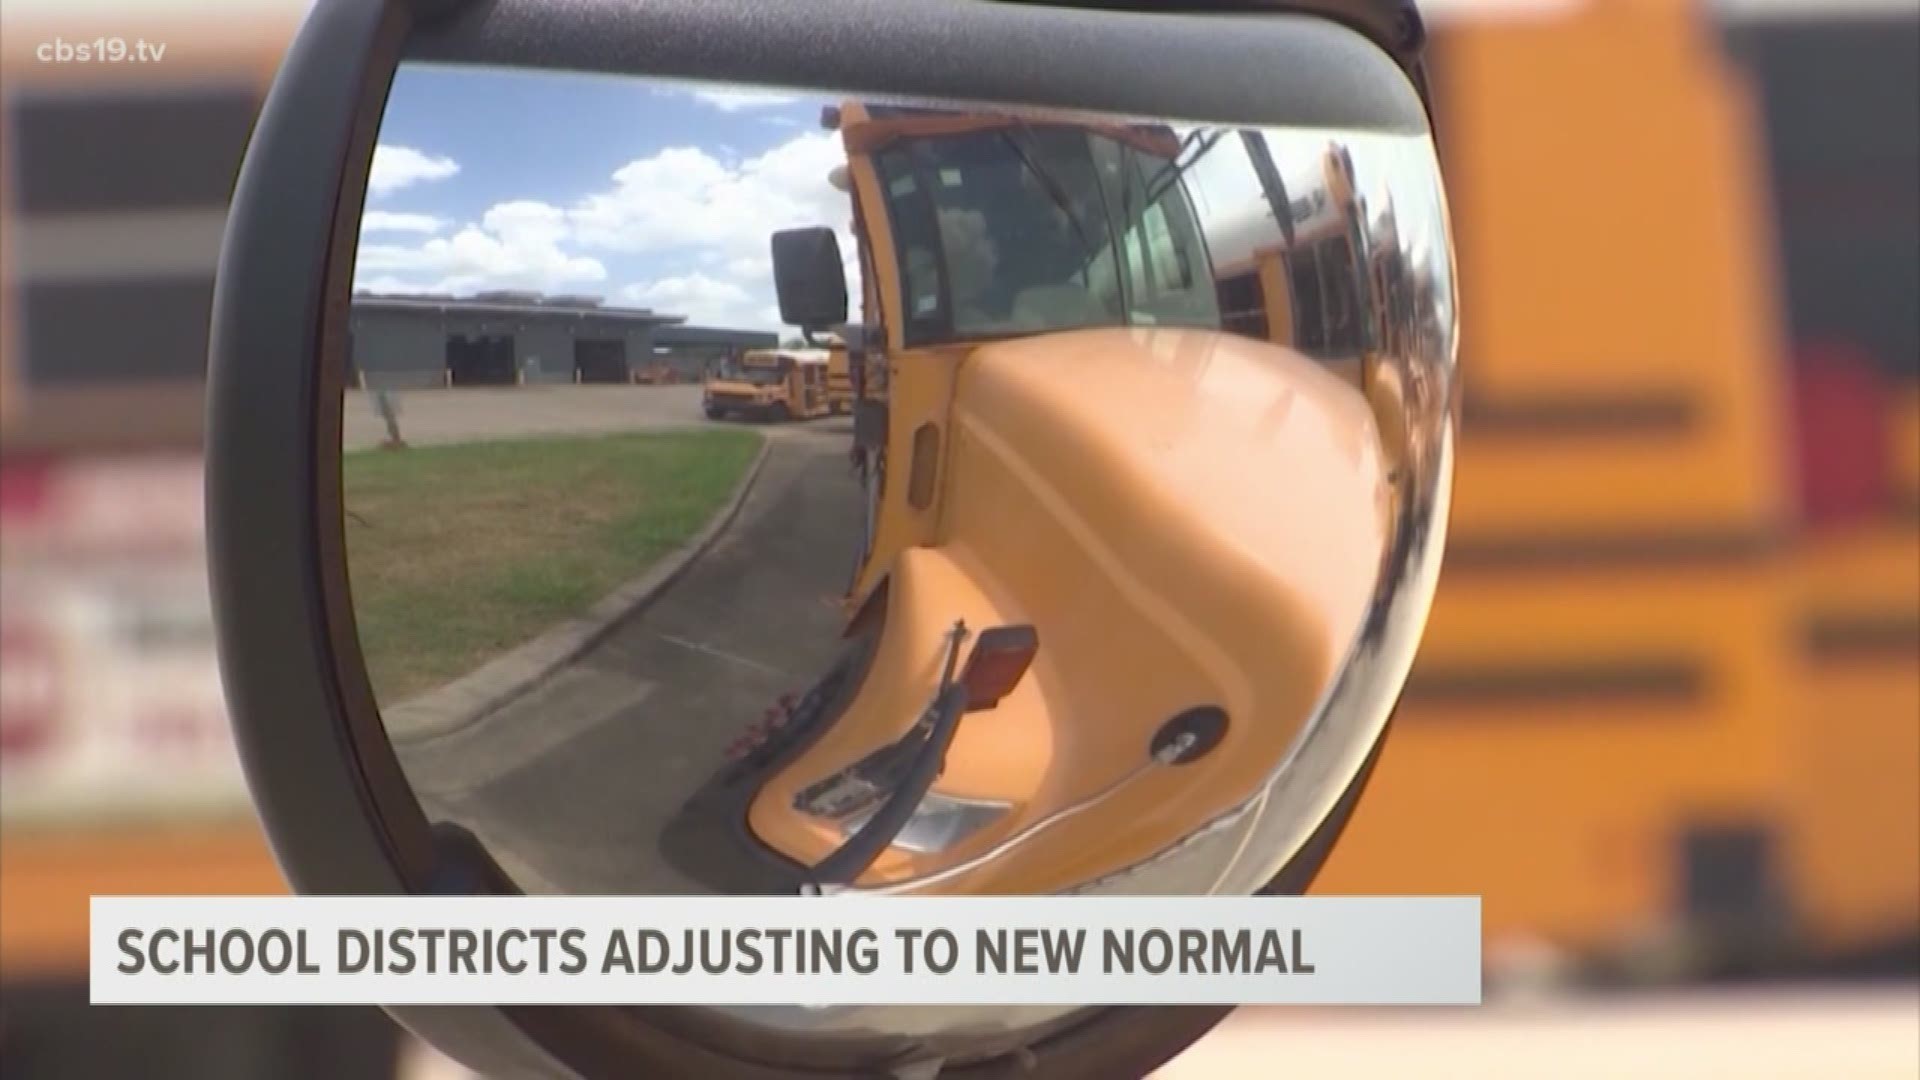 Chapel Hill ISD is making adjustments to make sure that students and staff members stay safe when returning to school.